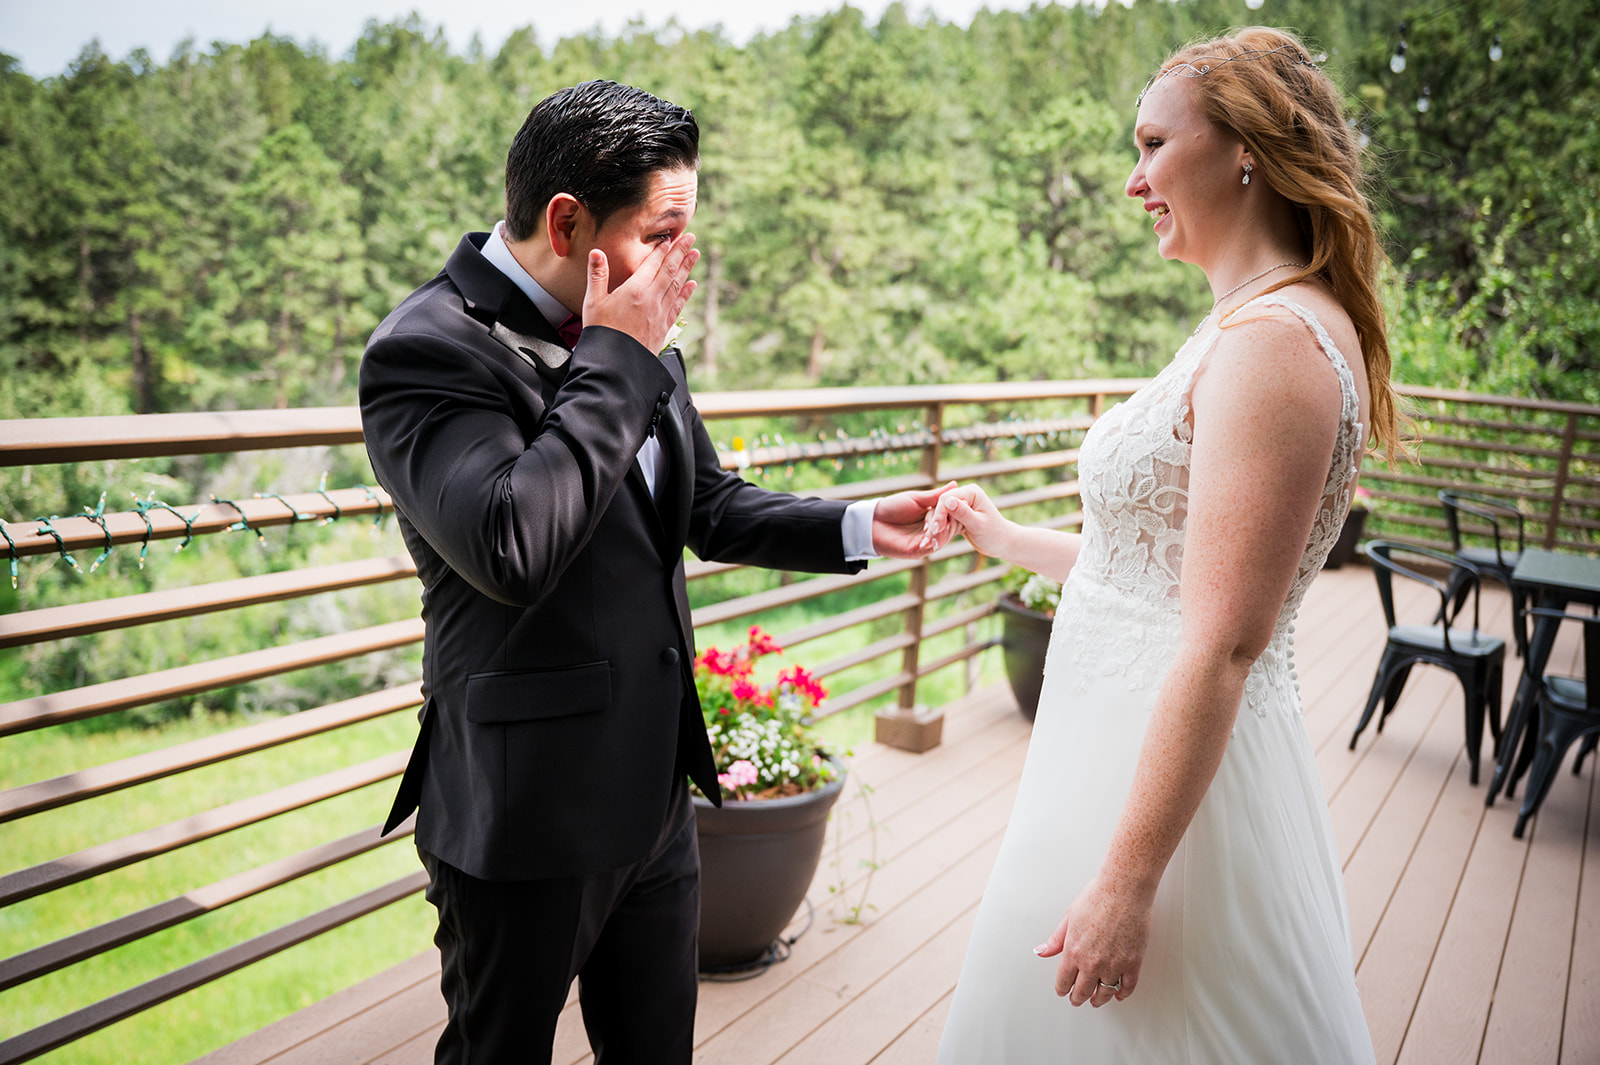 The groom wipes away a tear as he sees his bride for the first time on their wedding day.